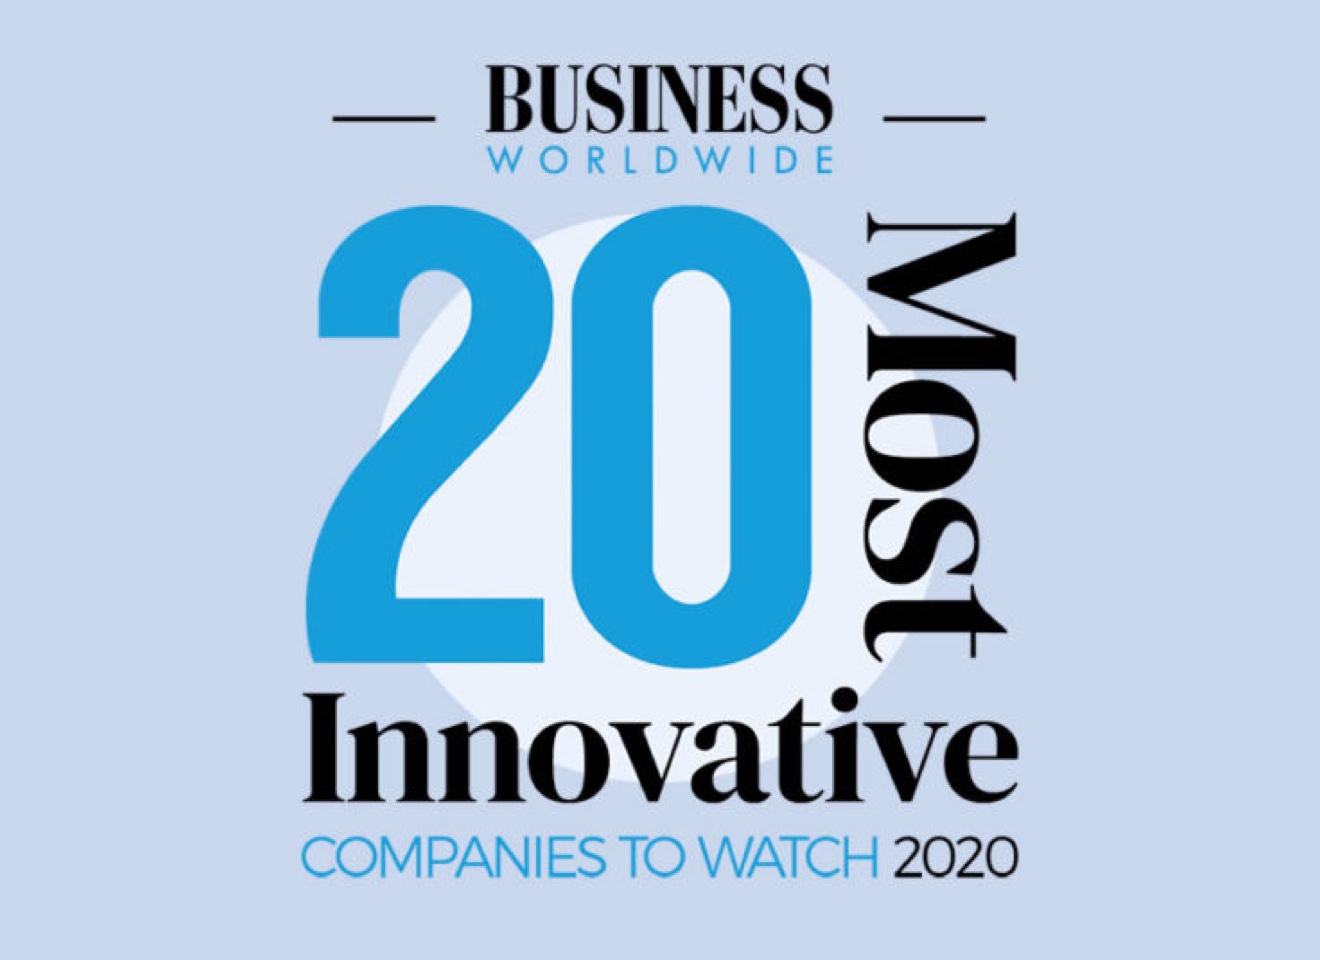 OpenExchange named by Business Worldwide Magazine as one of the 20 Most Innovative Companies to Watch, 2020 - thumbnail image